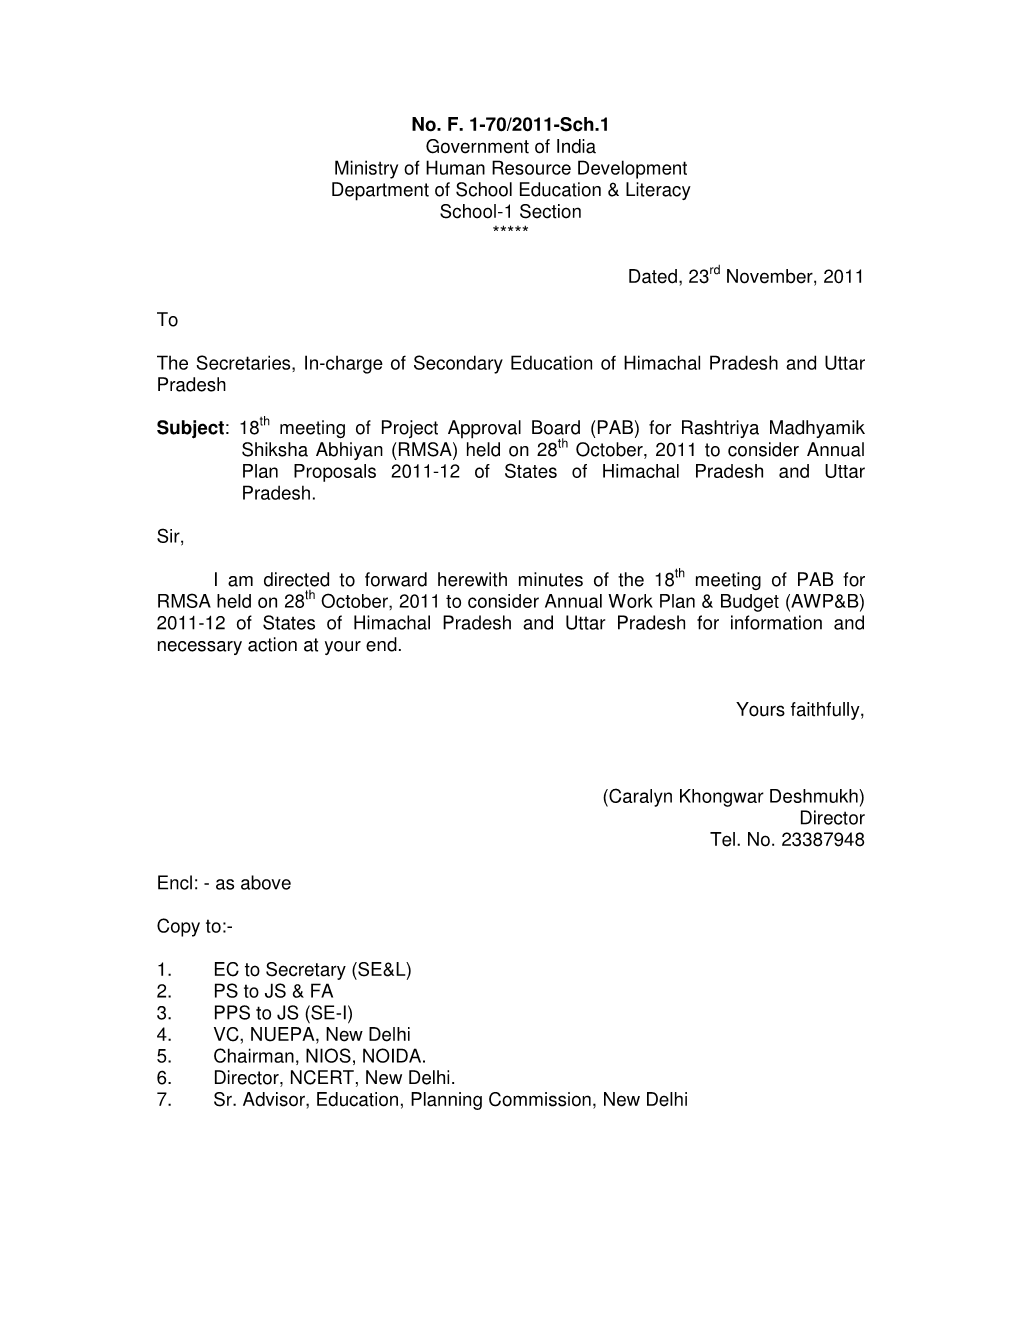 No. F. 1-70/2011-Sch.1 Government of India Ministry of Human Resource Development Department of School Education & Literacy School-1 Section *****